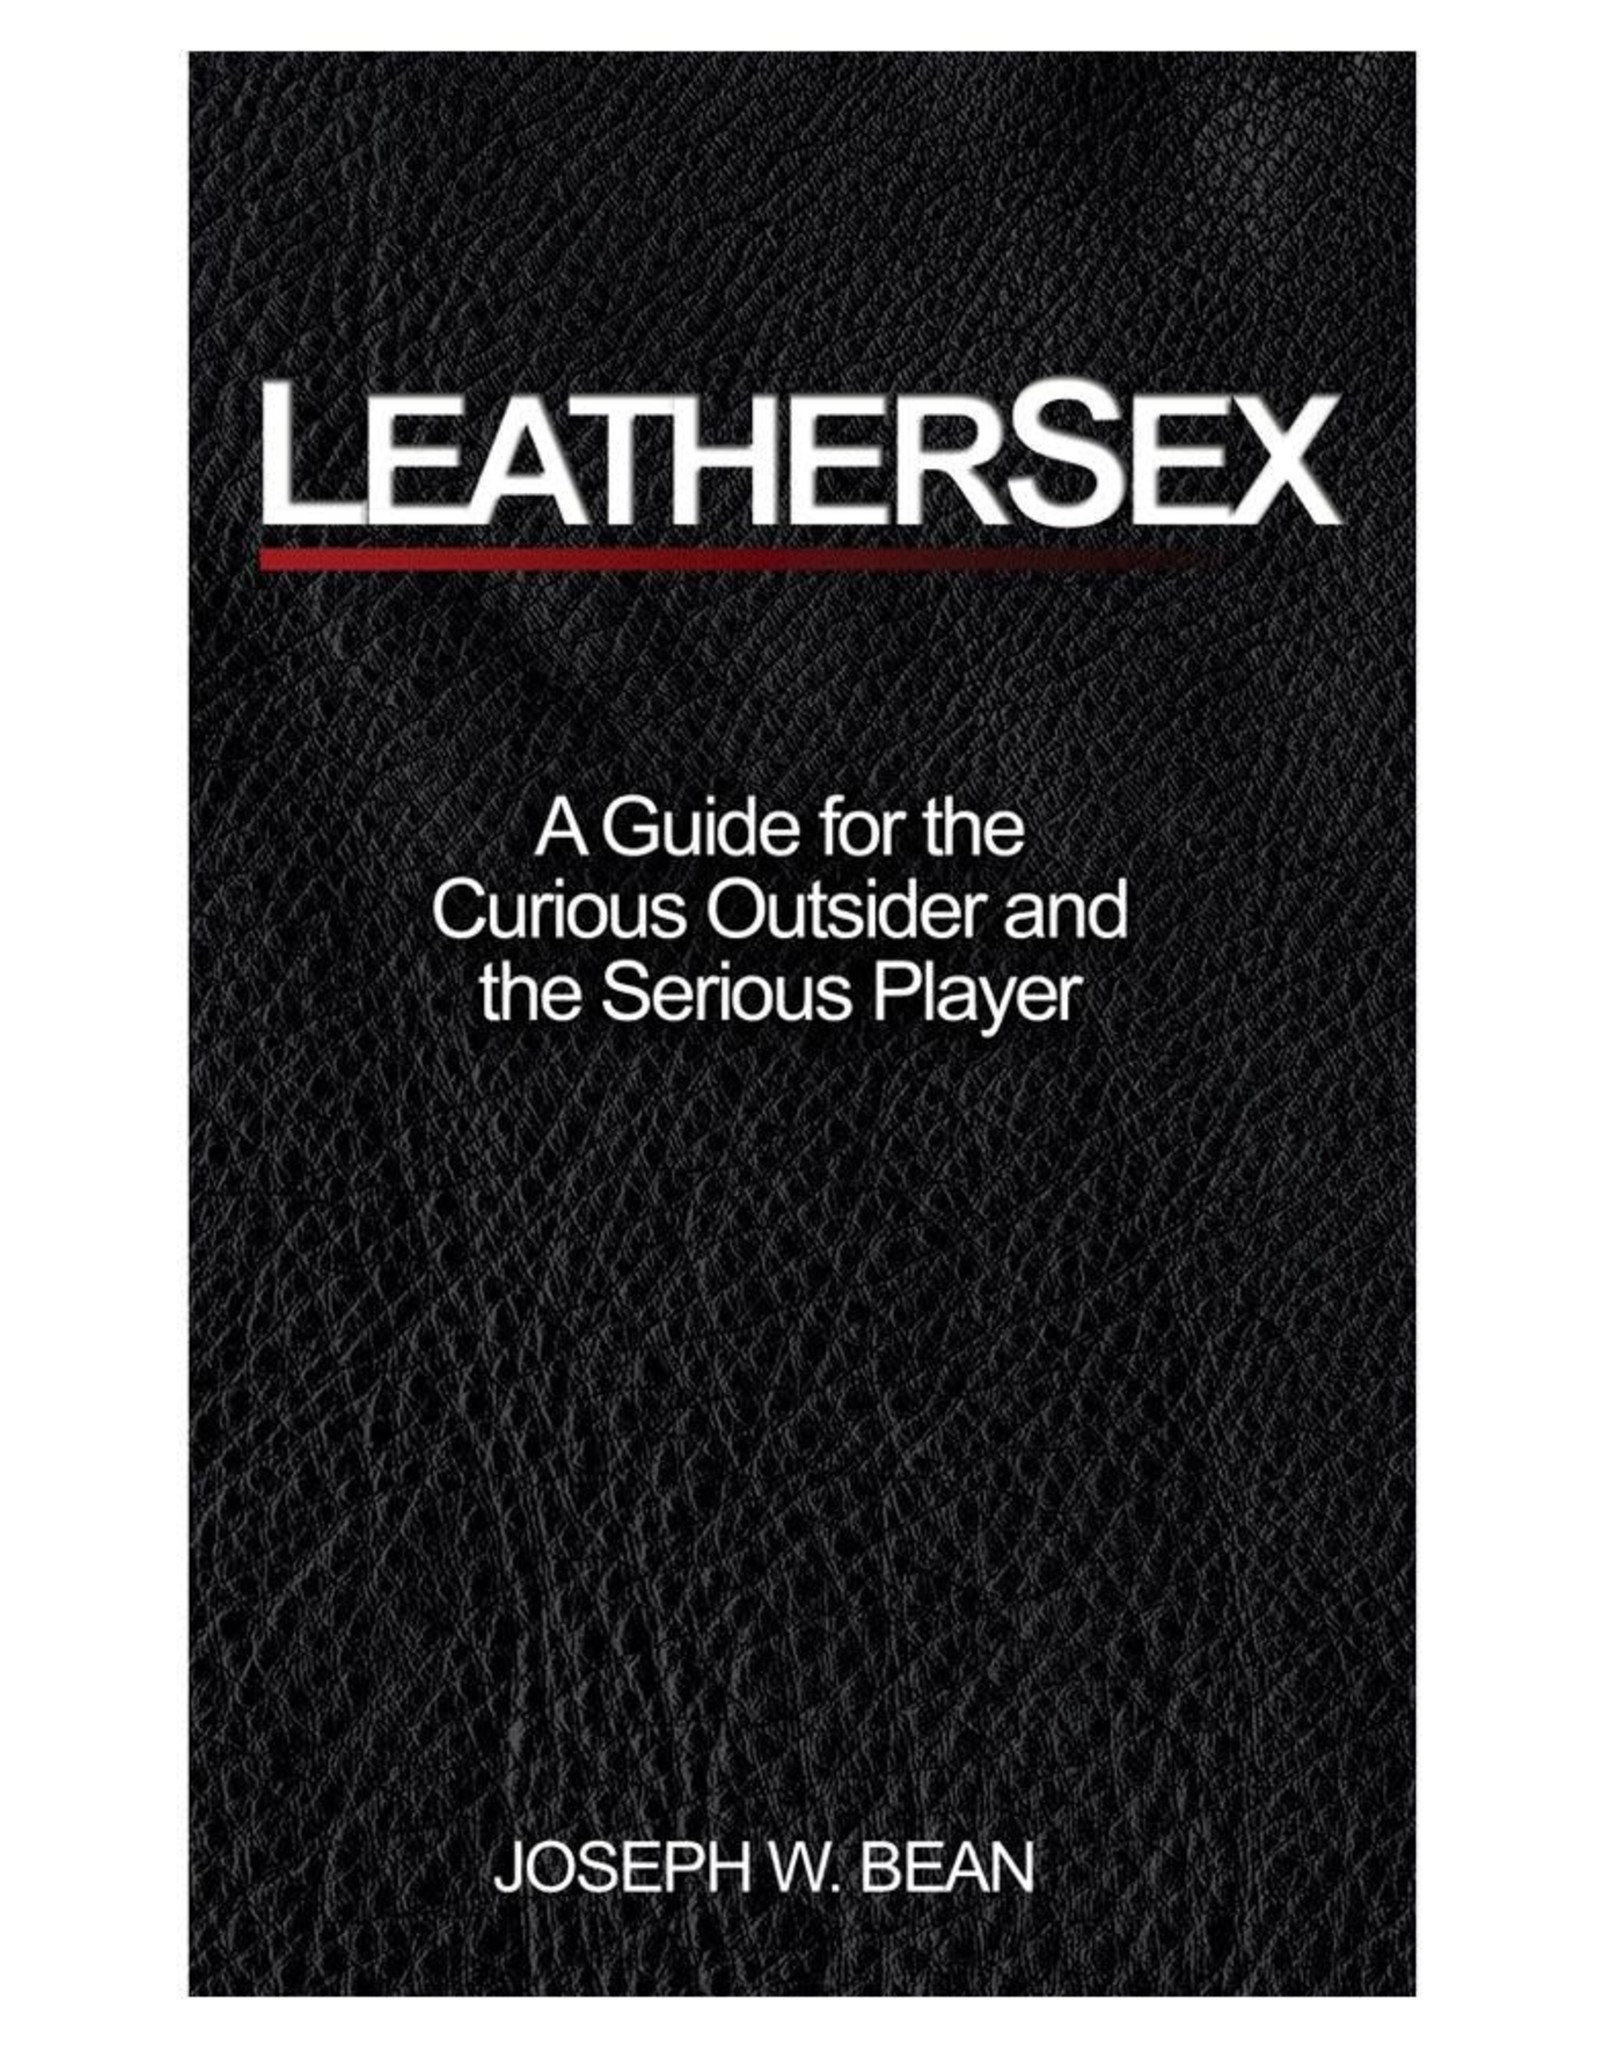 Stockroom Stockroom Books Leathersex: A Guide for the Curious Outsider and the Serious Player by Joseph W. Bean